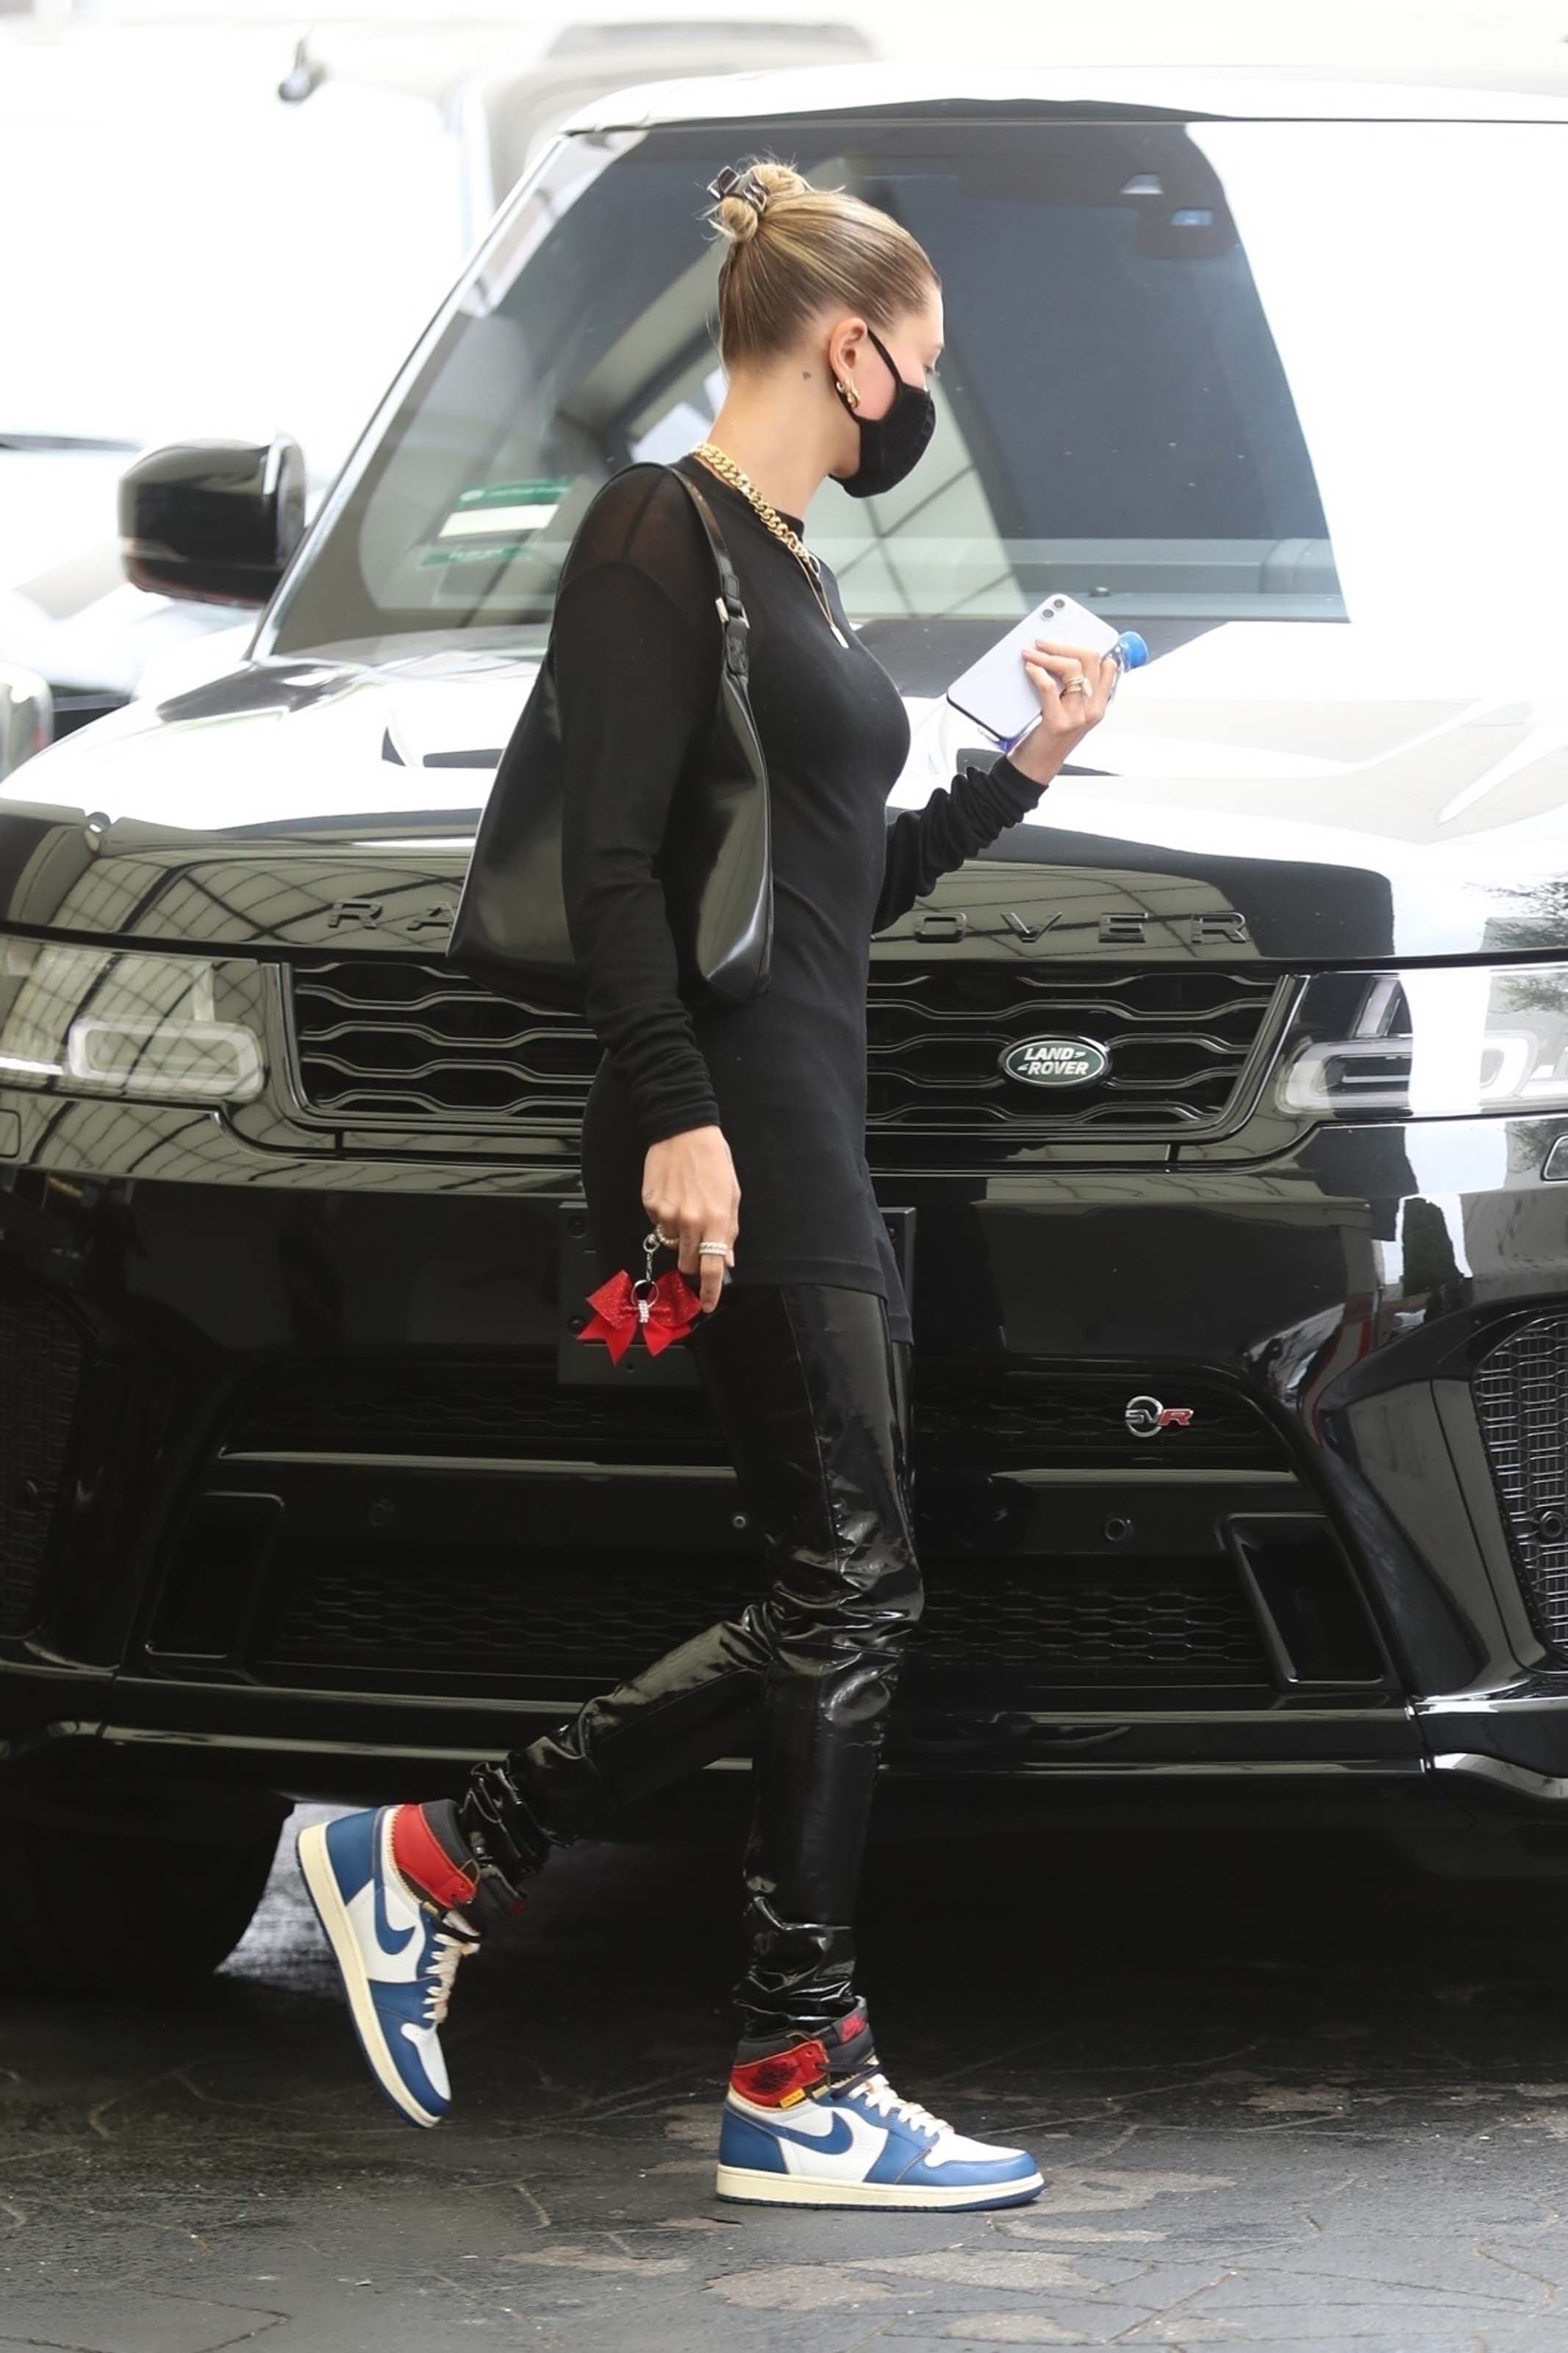 Hailey Bieber makes a stop at a dermatologist office